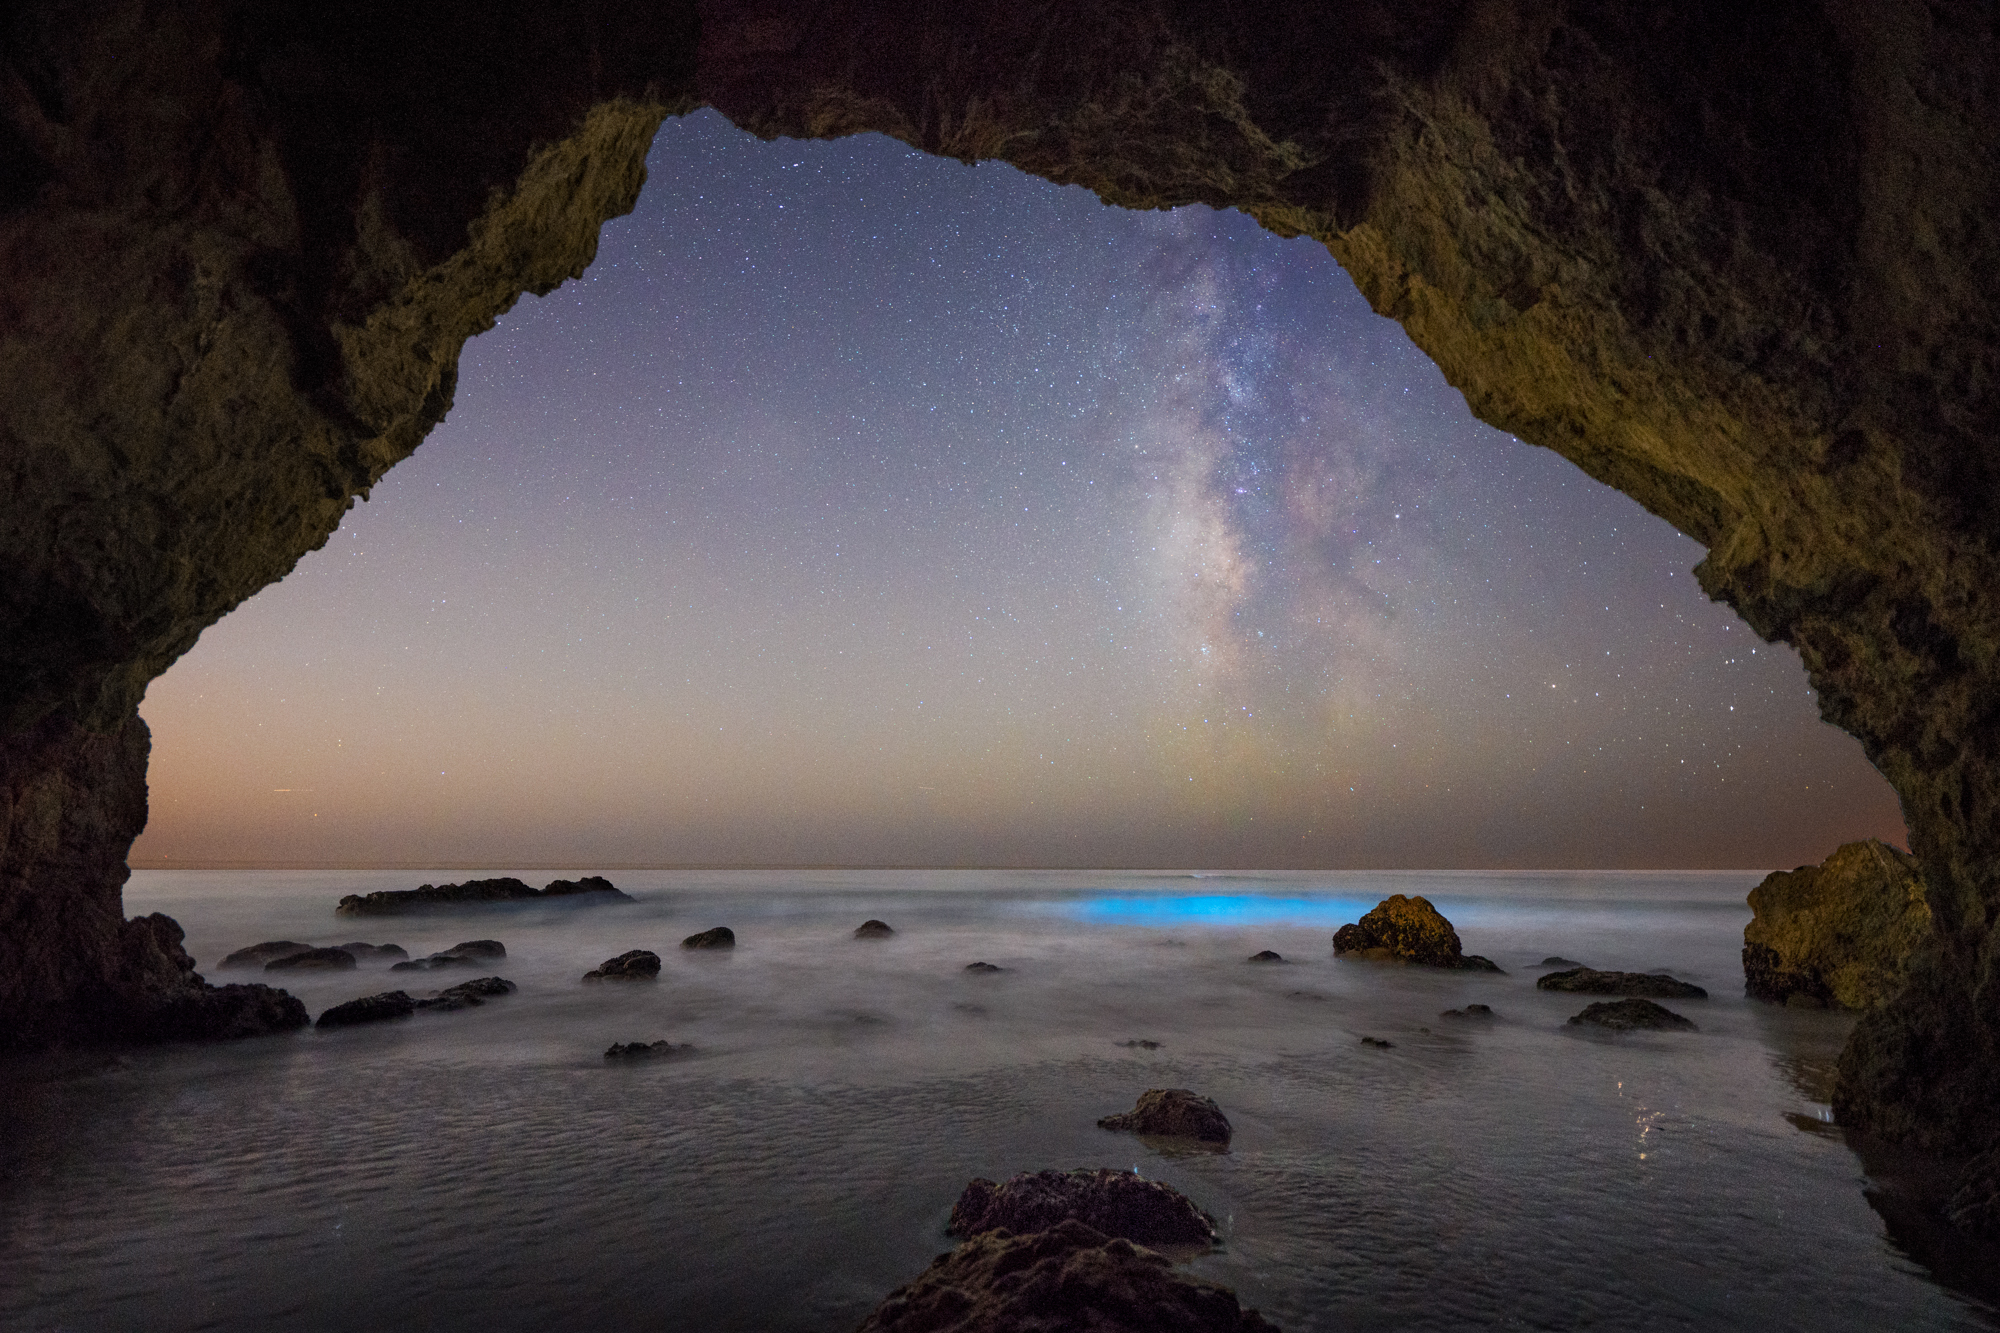 Gallery 11 Otherworldly Photos Of Land Sea And Sky At Night